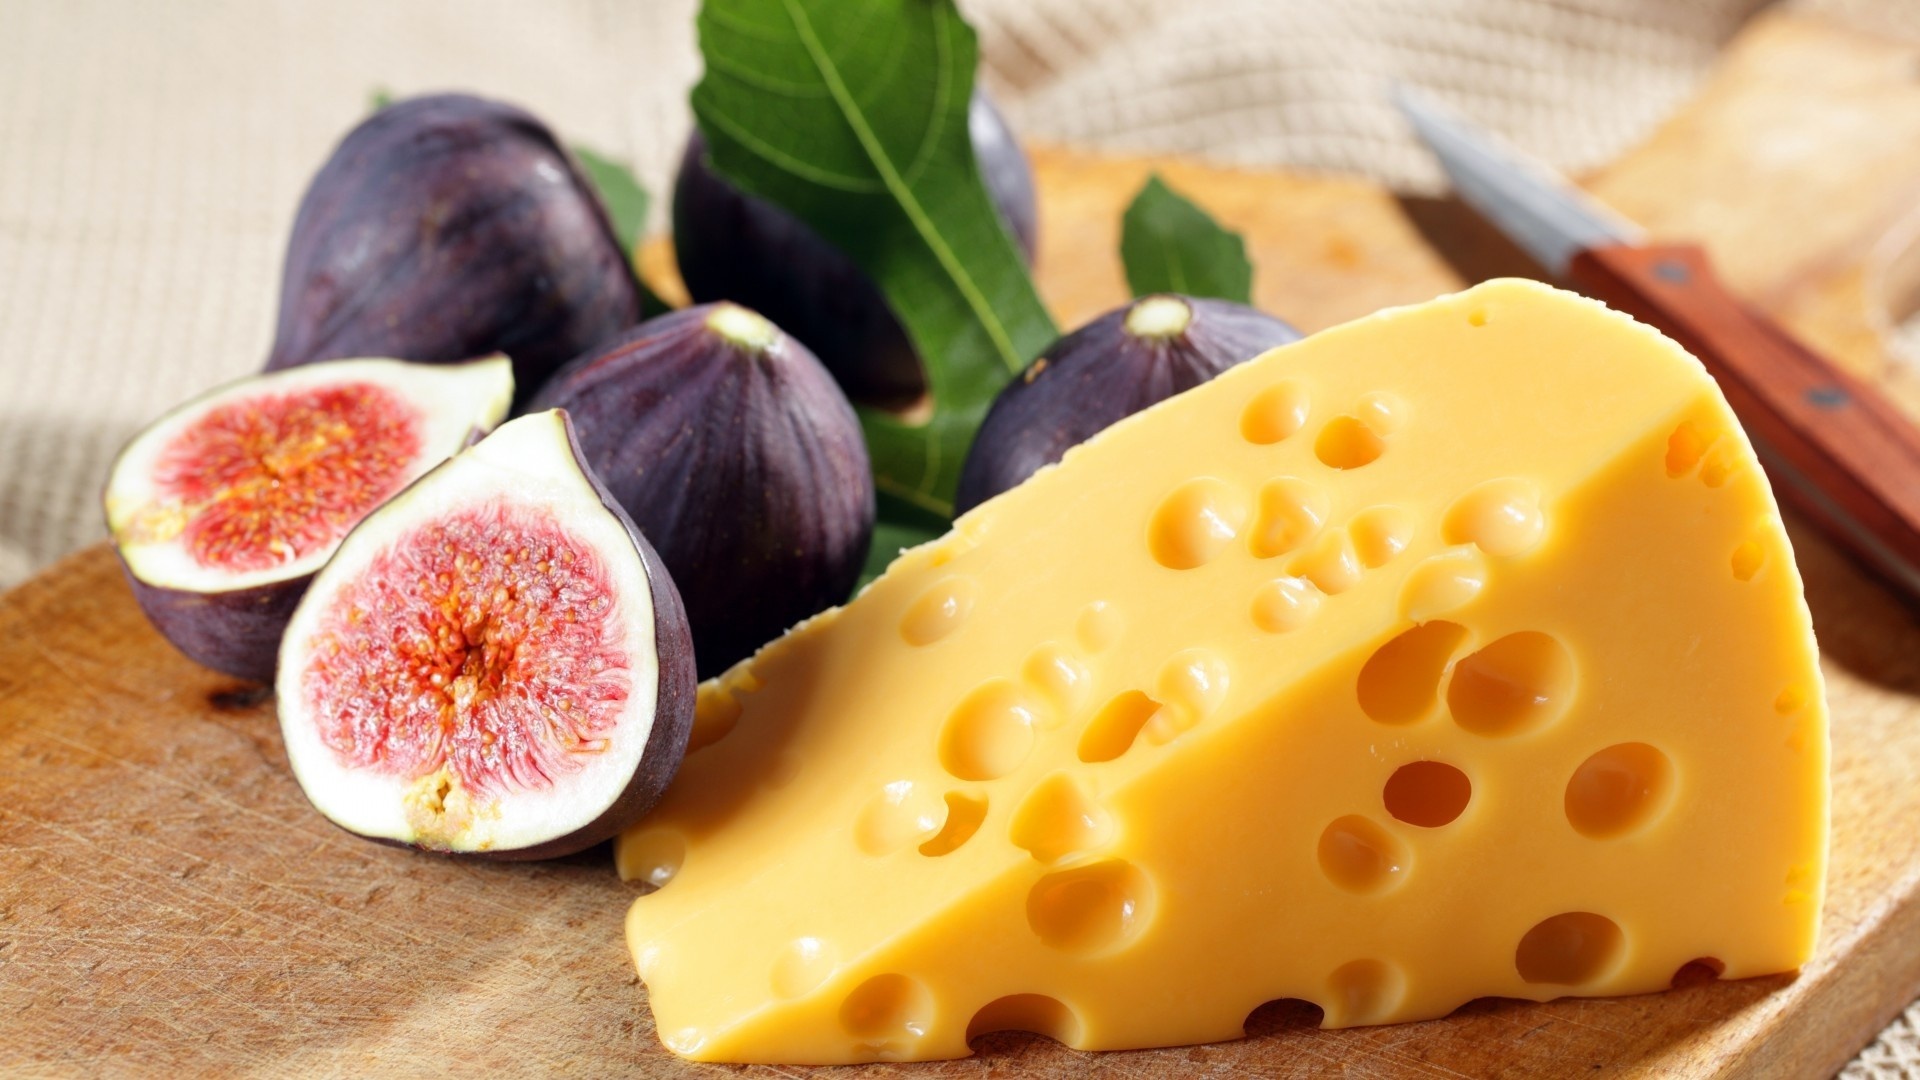 Cheese: Can be made from raw or pasteurized milk, Natural foods. 1920x1080 Full HD Background.